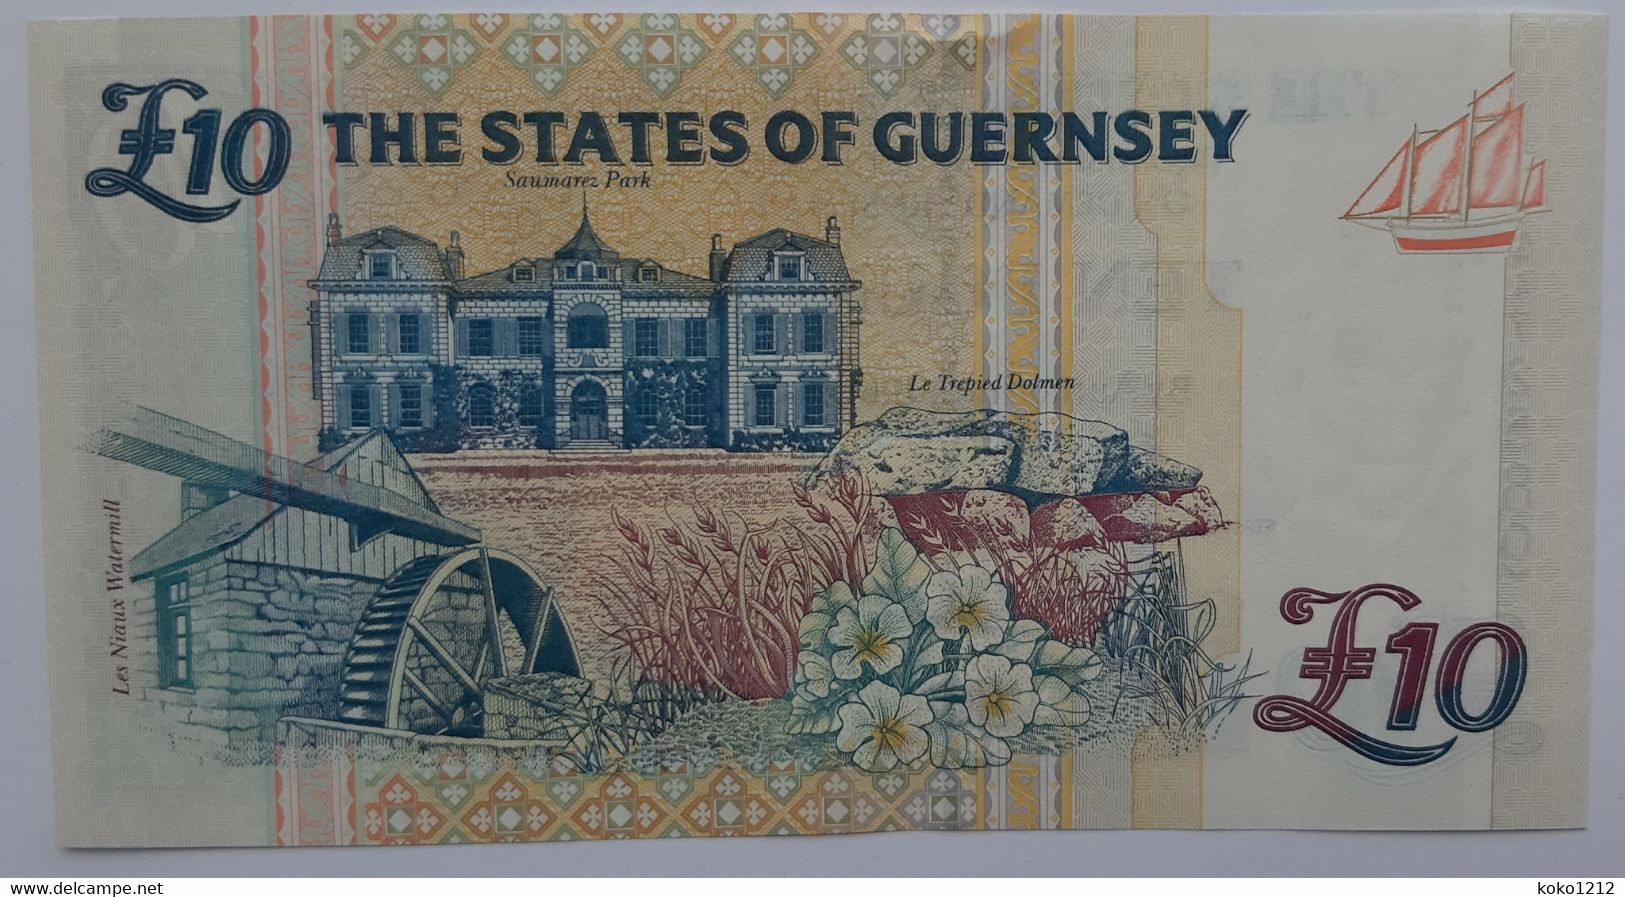 Guernsey 10 Pounds N.D. P57a UNC - Guernesey